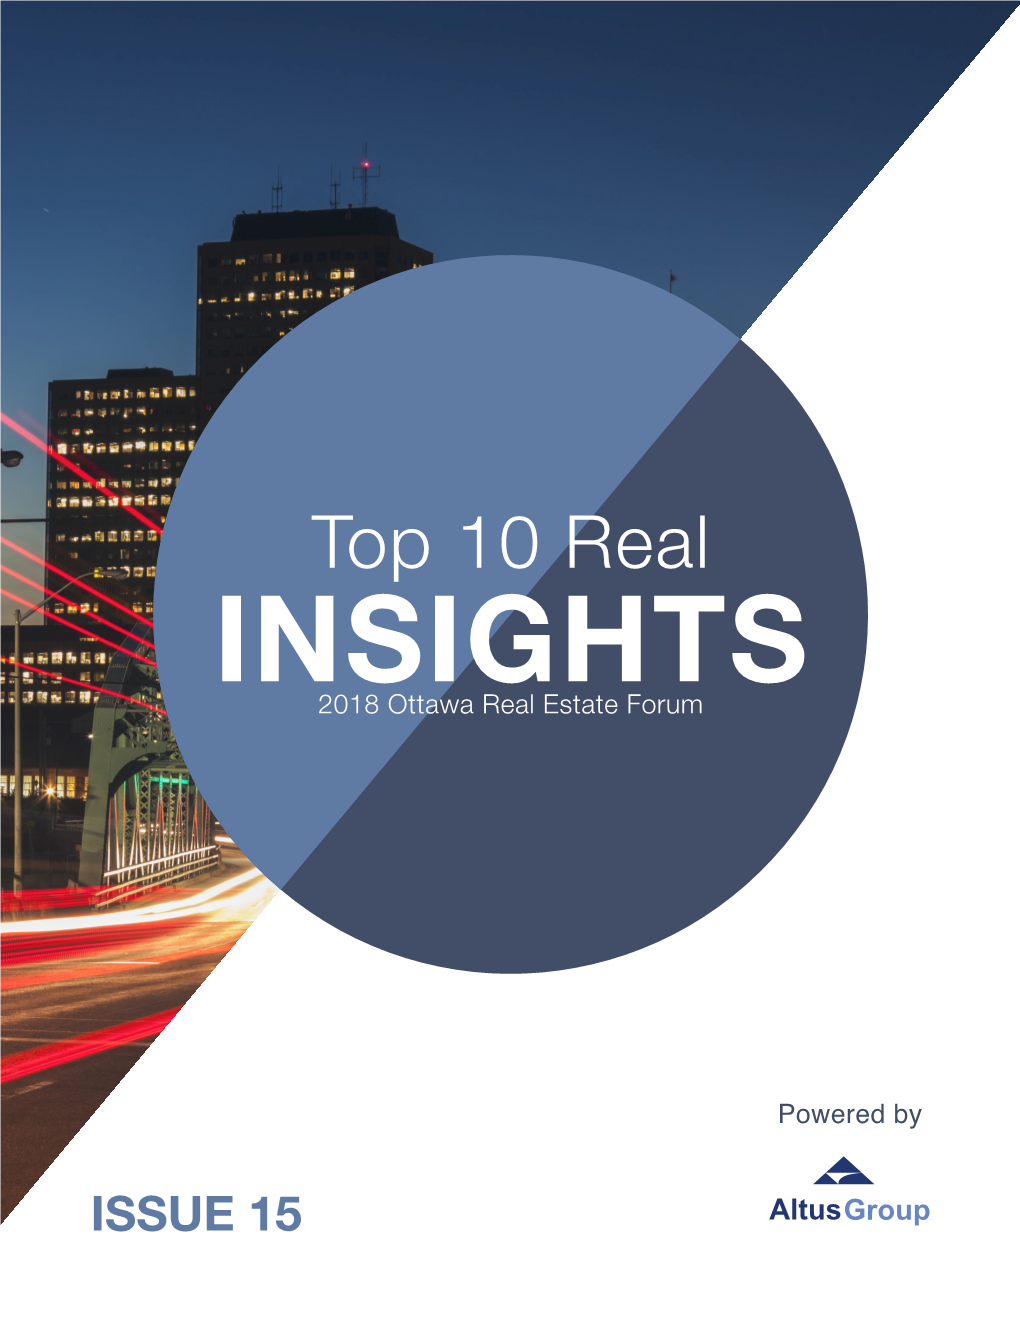 Top 10 Real INSIGHTS 2018 Ottawa Real Estate Forum